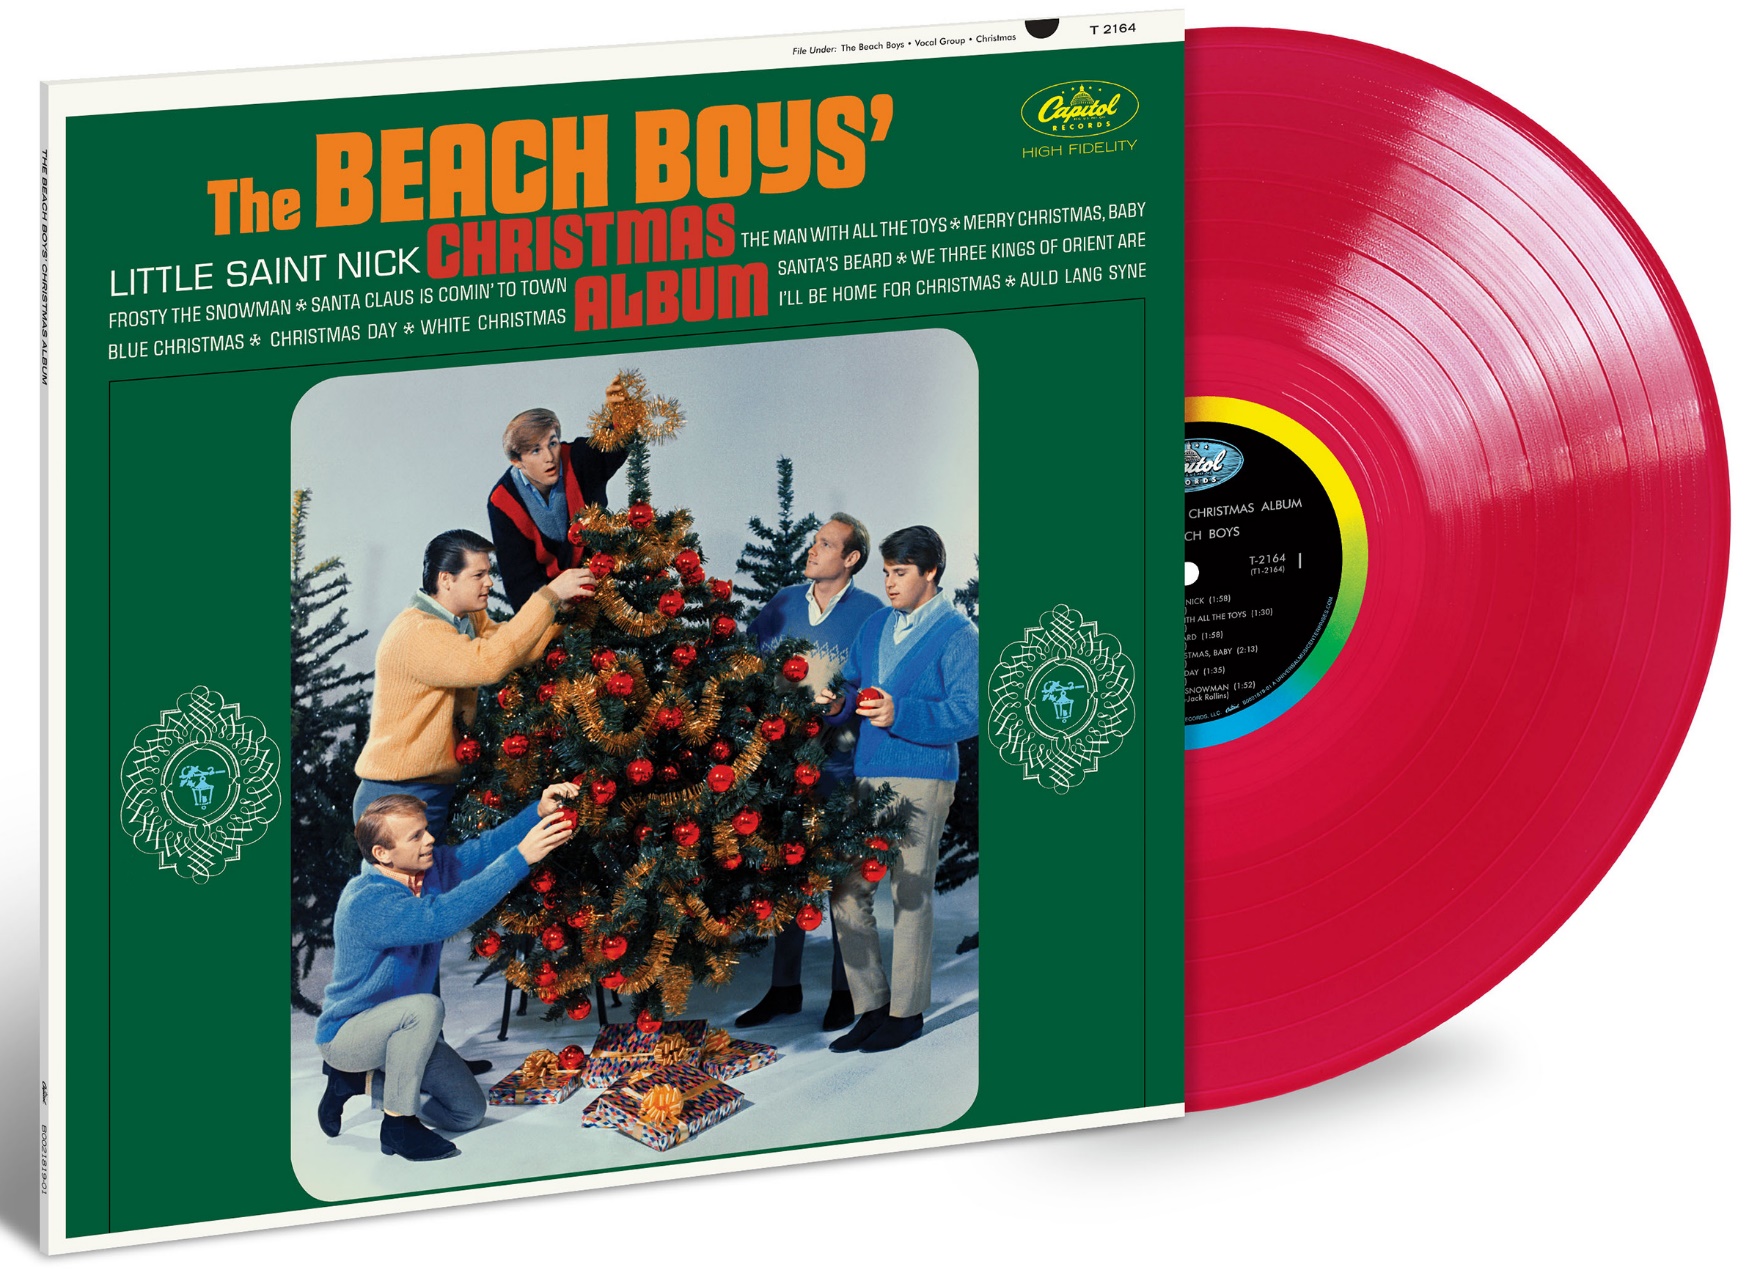 THE BEACH BOYS' CLASSIC ALBUMS – PET SOUNDS AND THE BEACH BOYS' CHRISTMAS  ALBUM – NOW AVAILABLE ON LIMITED EDITION COLOUR VINYL FOR THE HOLIDAYS –  Press Releases – Universal Music Canada